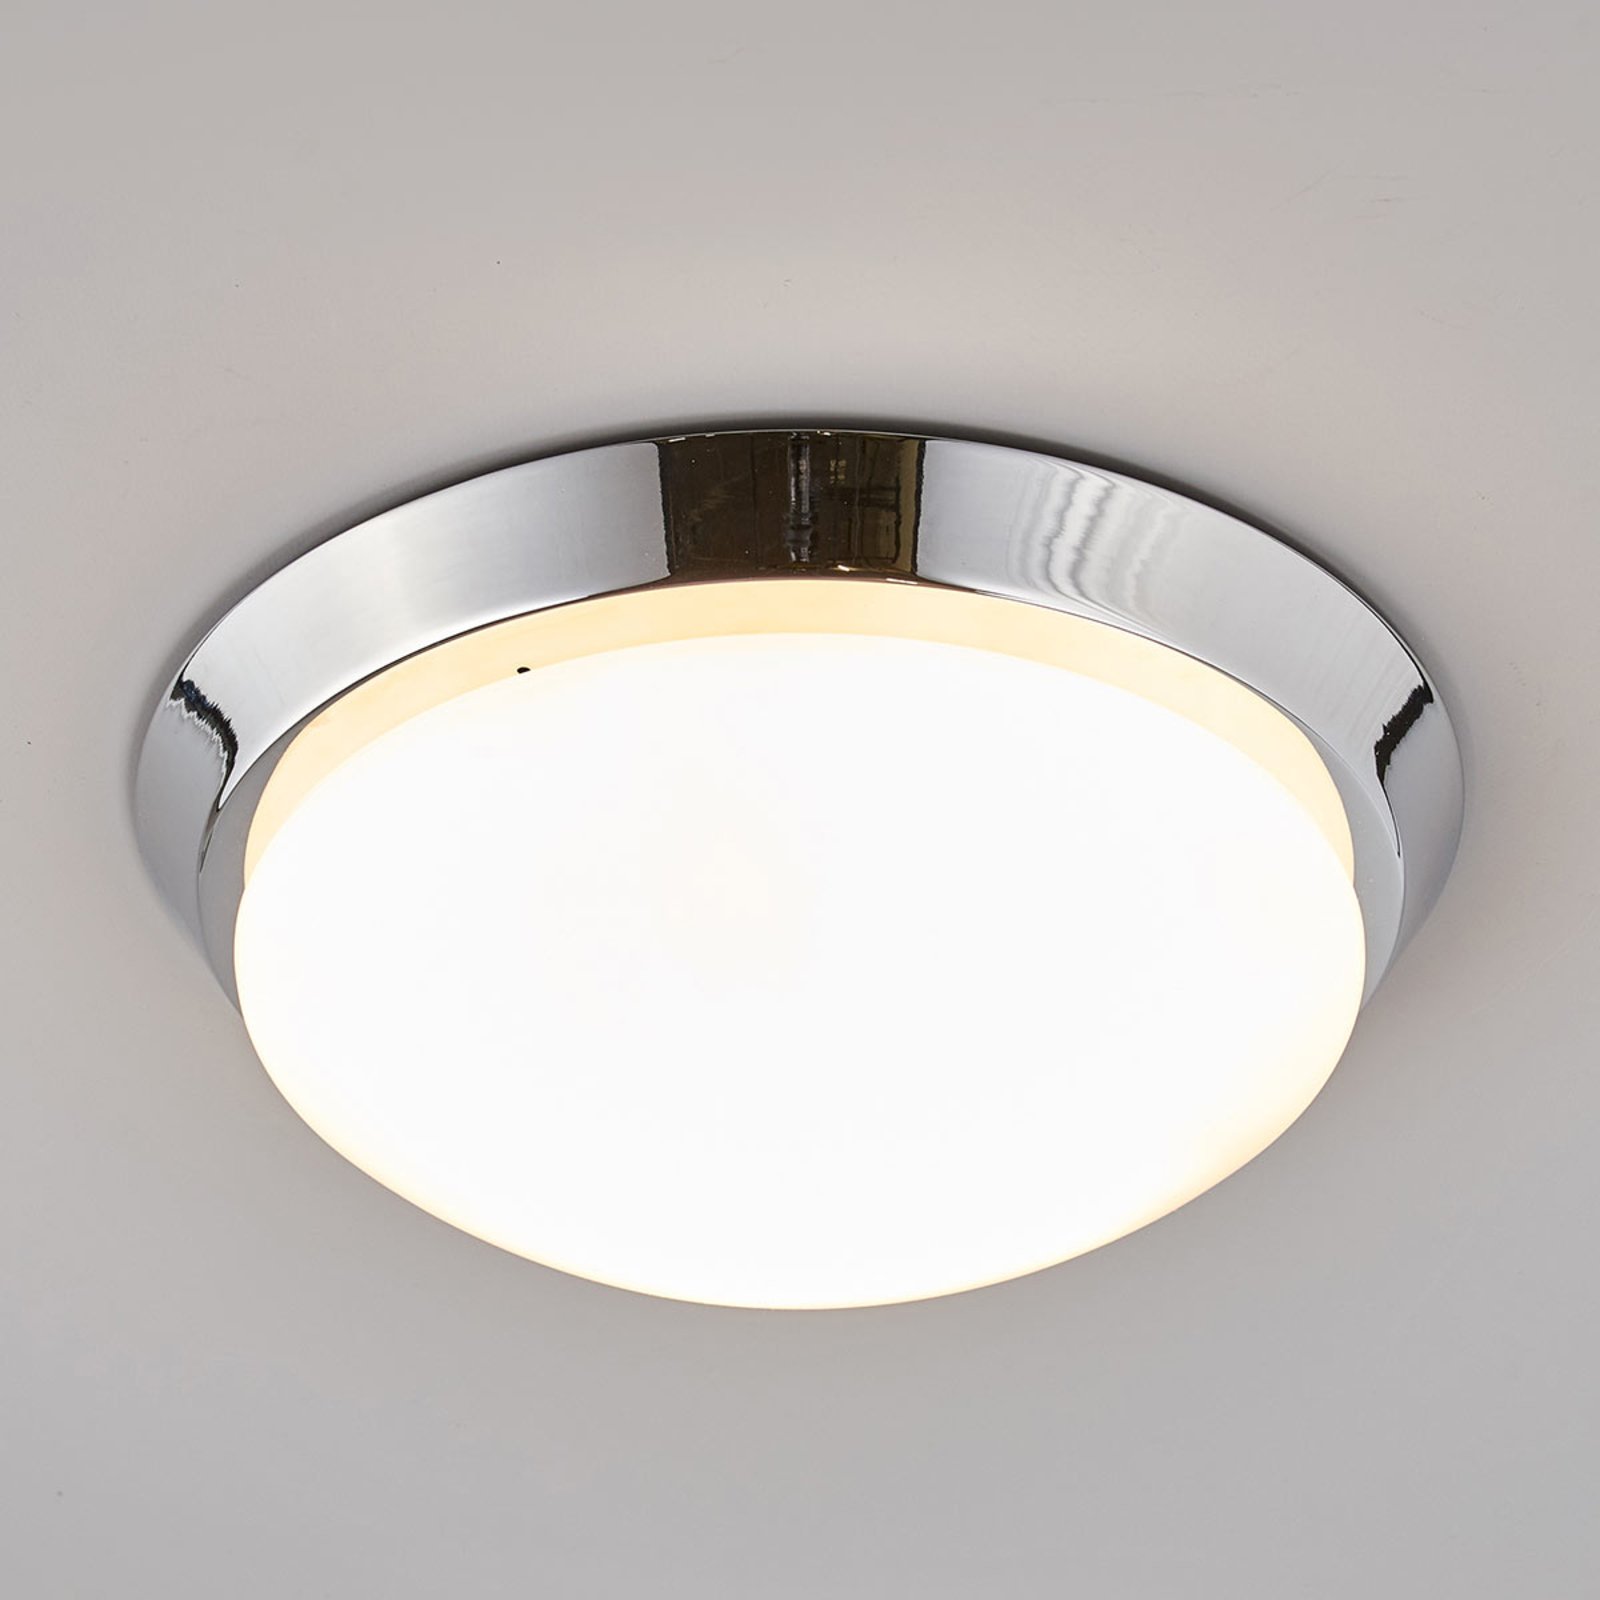 Round ceiling light Dilani for the bathroom